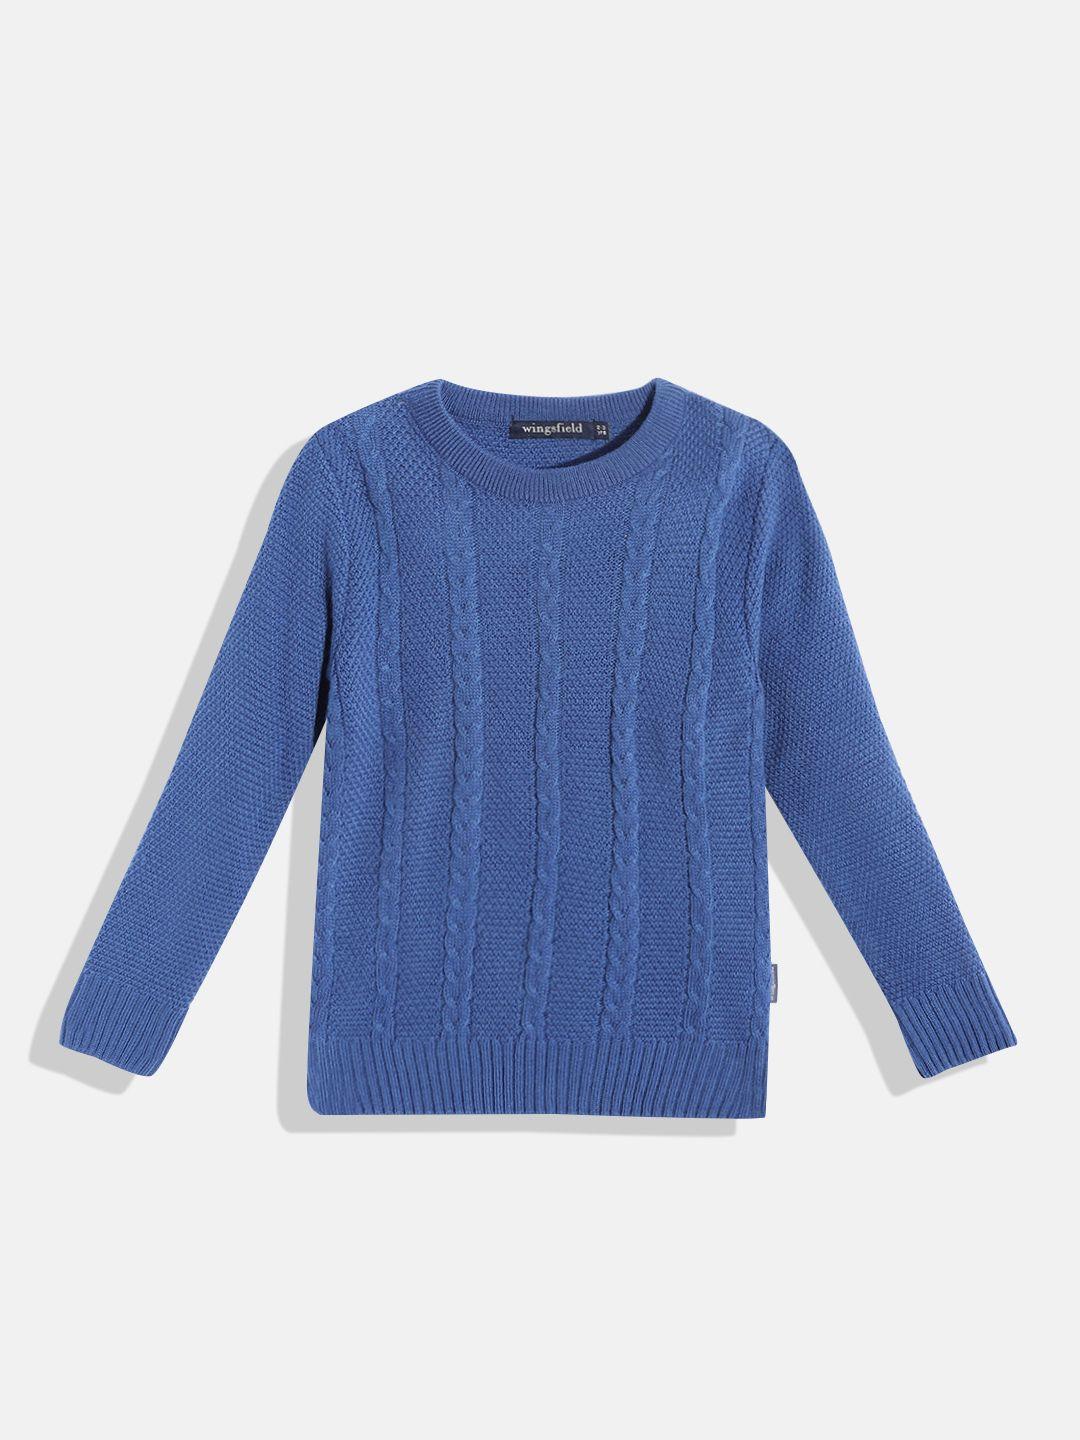 wingsfield-boys-blue-cable-knit-pullover